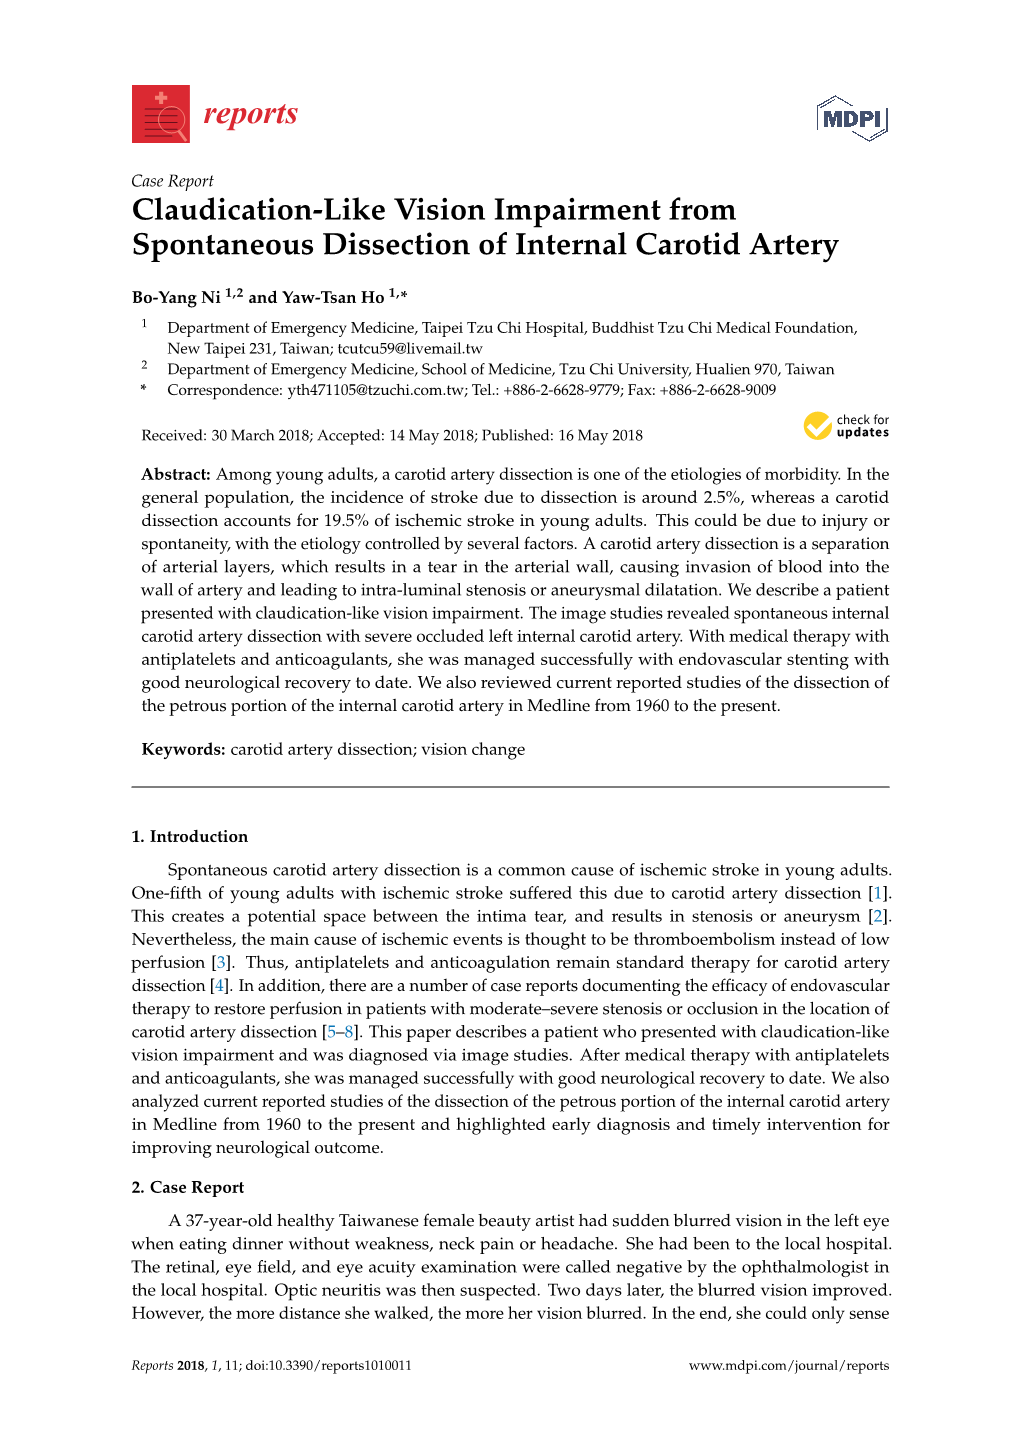 Claudication-Like Vision Impairment from Spontaneous Dissection of Internal Carotid Artery